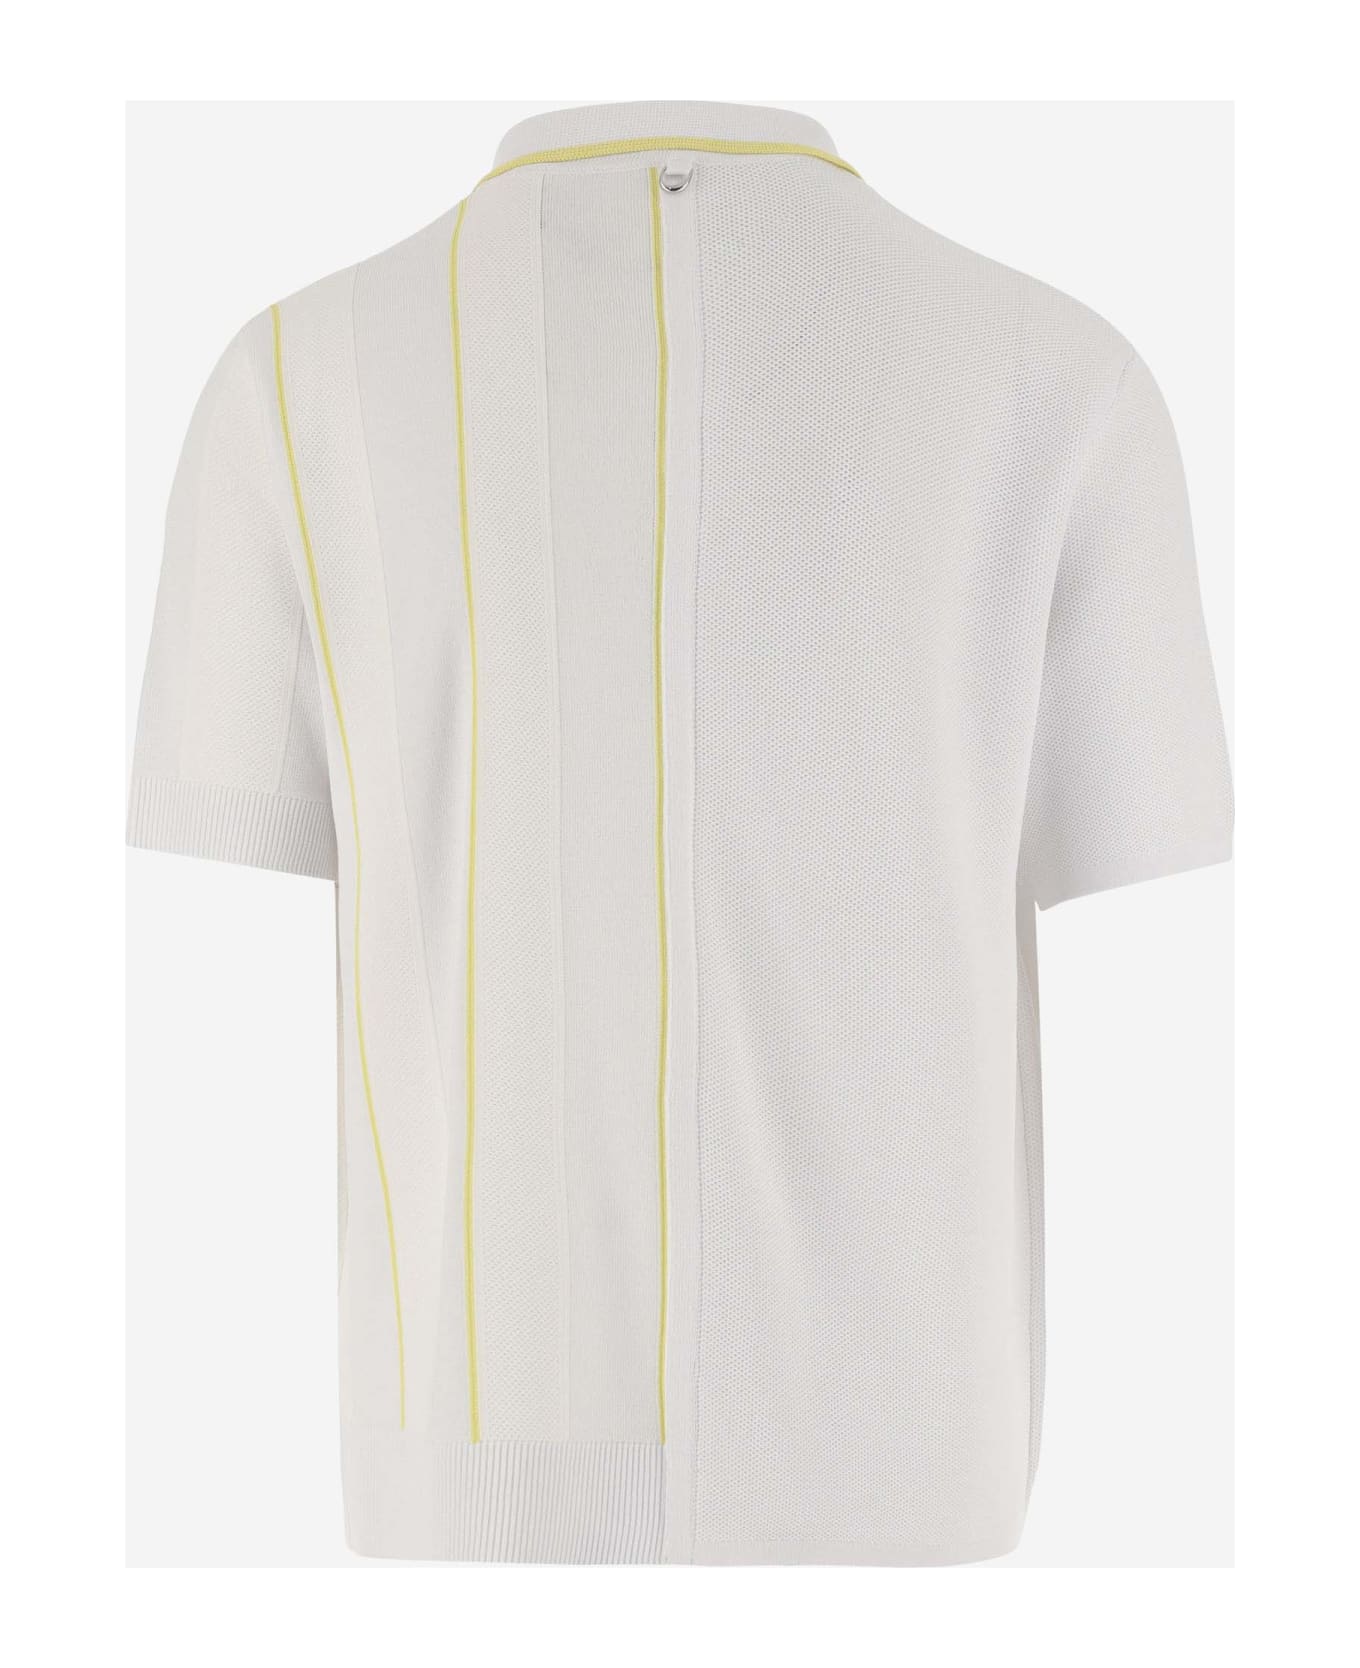 Jacquemus Contrast Knitted Polo Shirt - White ポロシャツ